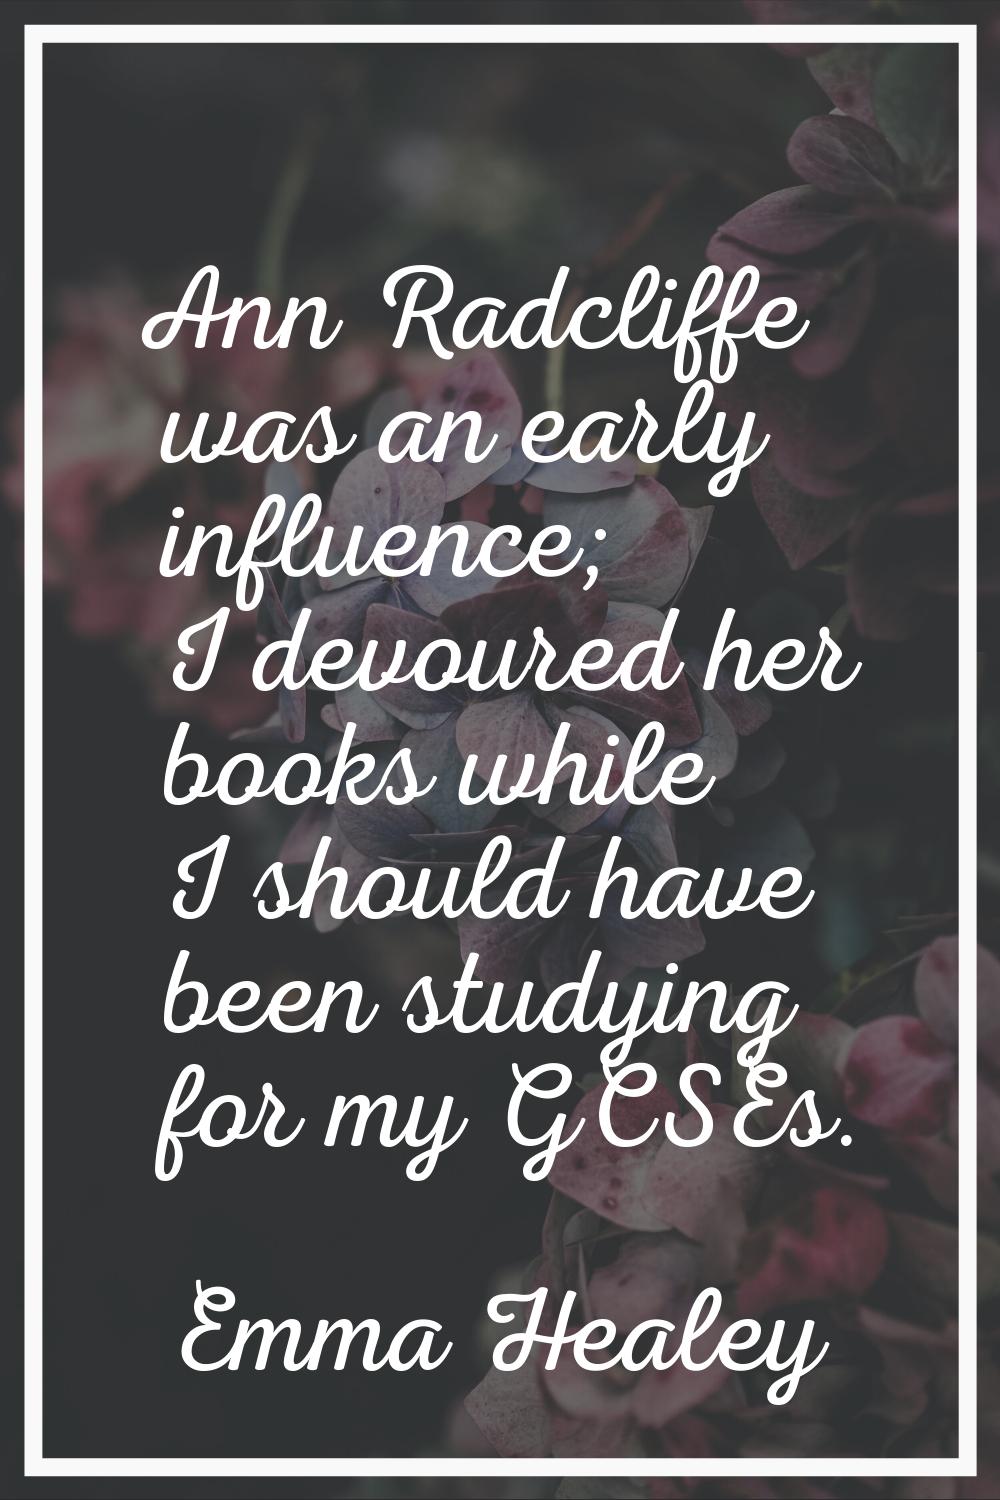 Ann Radcliffe was an early influence; I devoured her books while I should have been studying for my